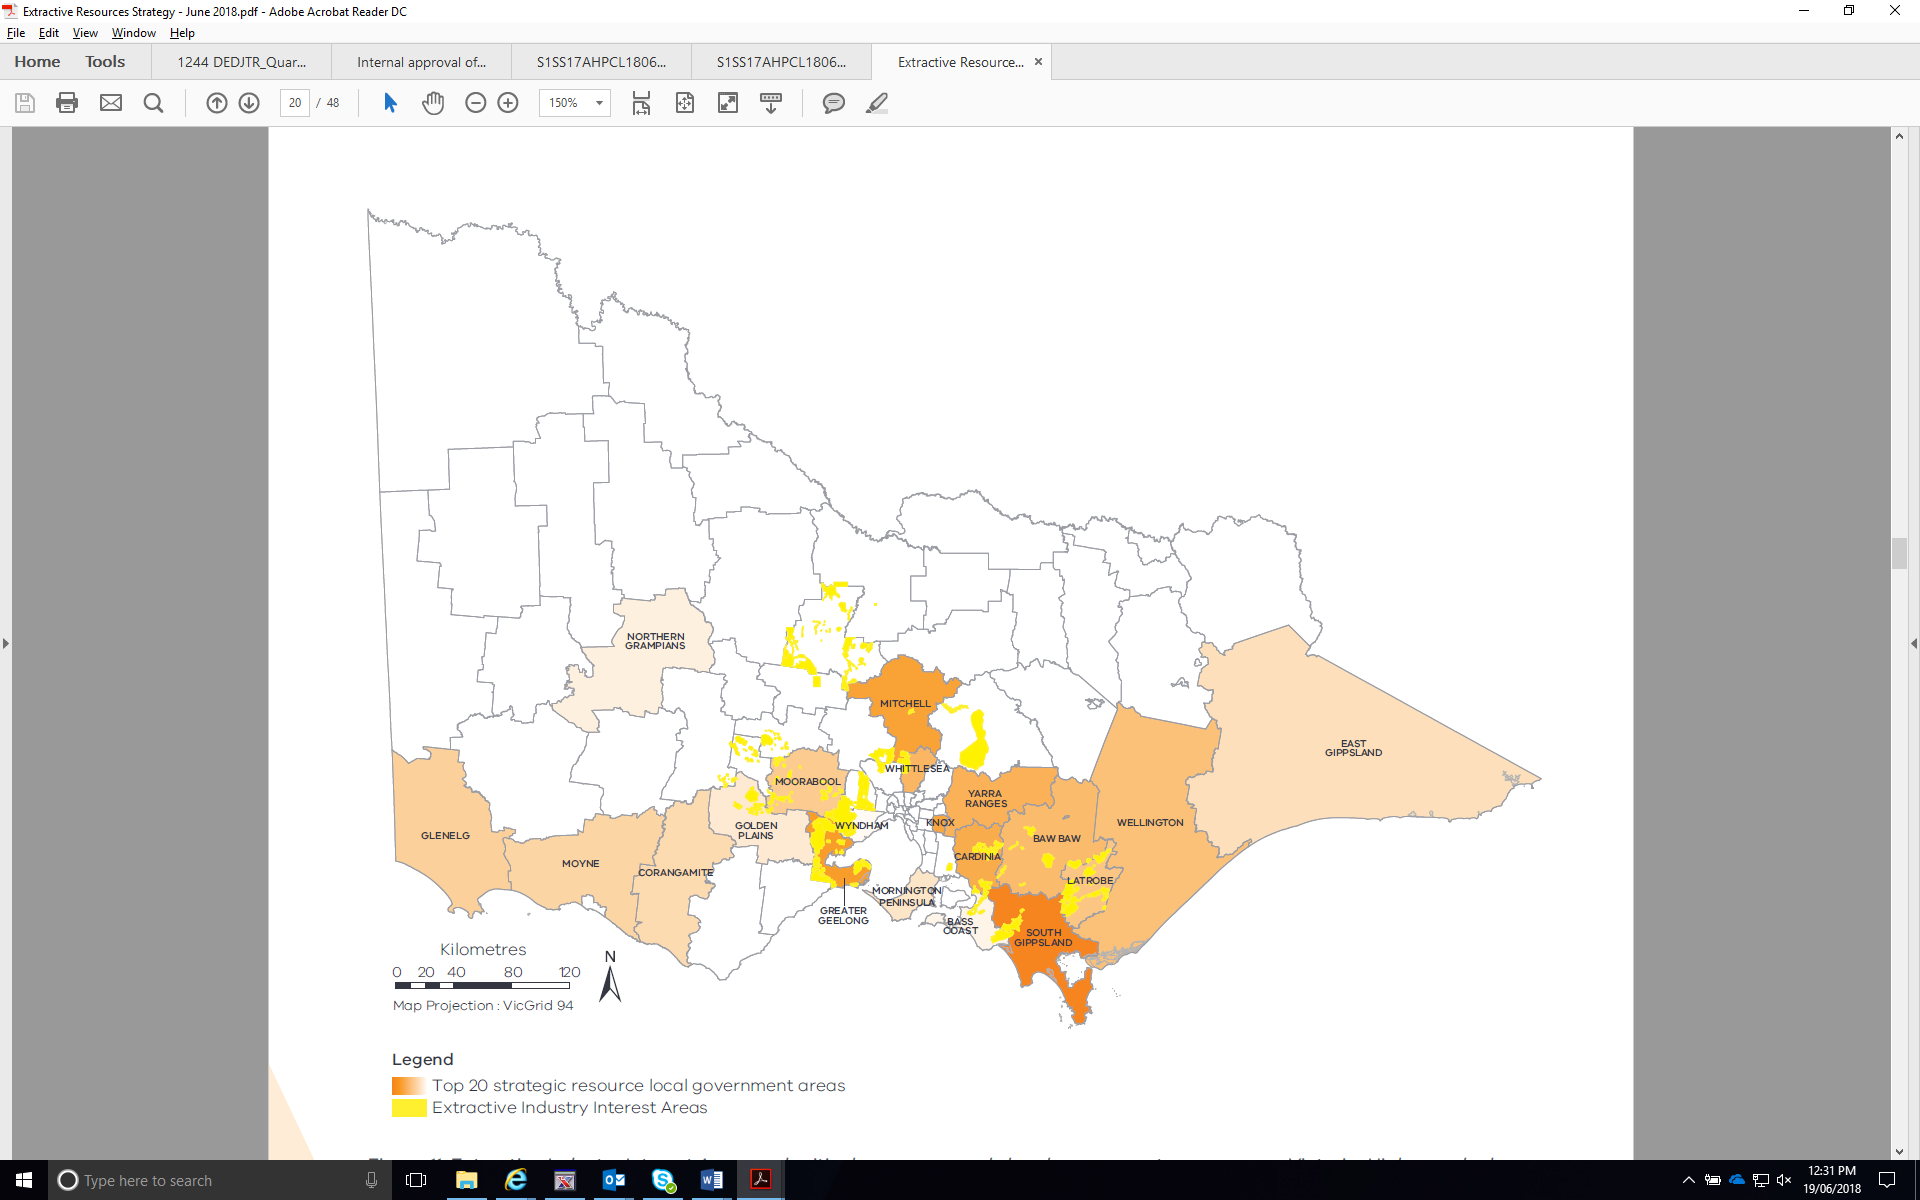 map of victoria carved up by lgas. the top 20 strategic resource lgas are coloured (from south gippsland as the most important lga). overlaid are eiias - around two thirds of which occur in the top 20 lgas. 